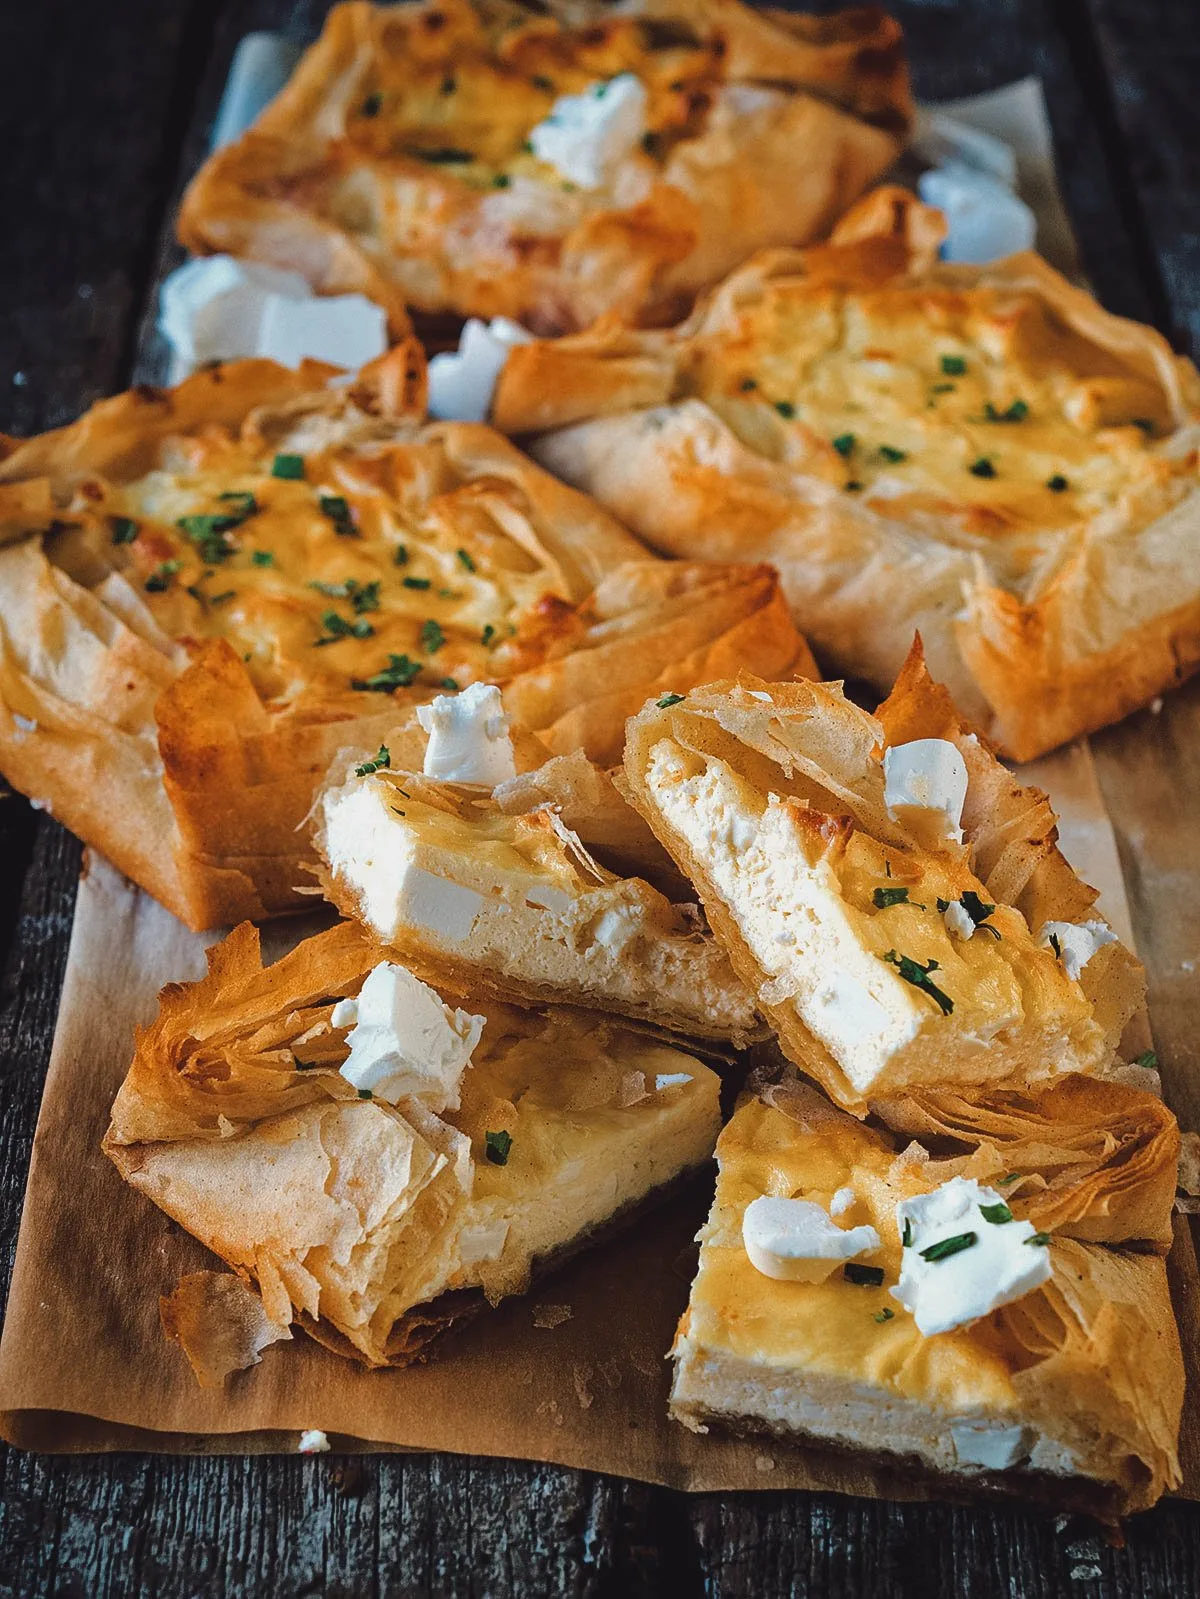 Gibanica, Serbian cheese pie made with filo pastry